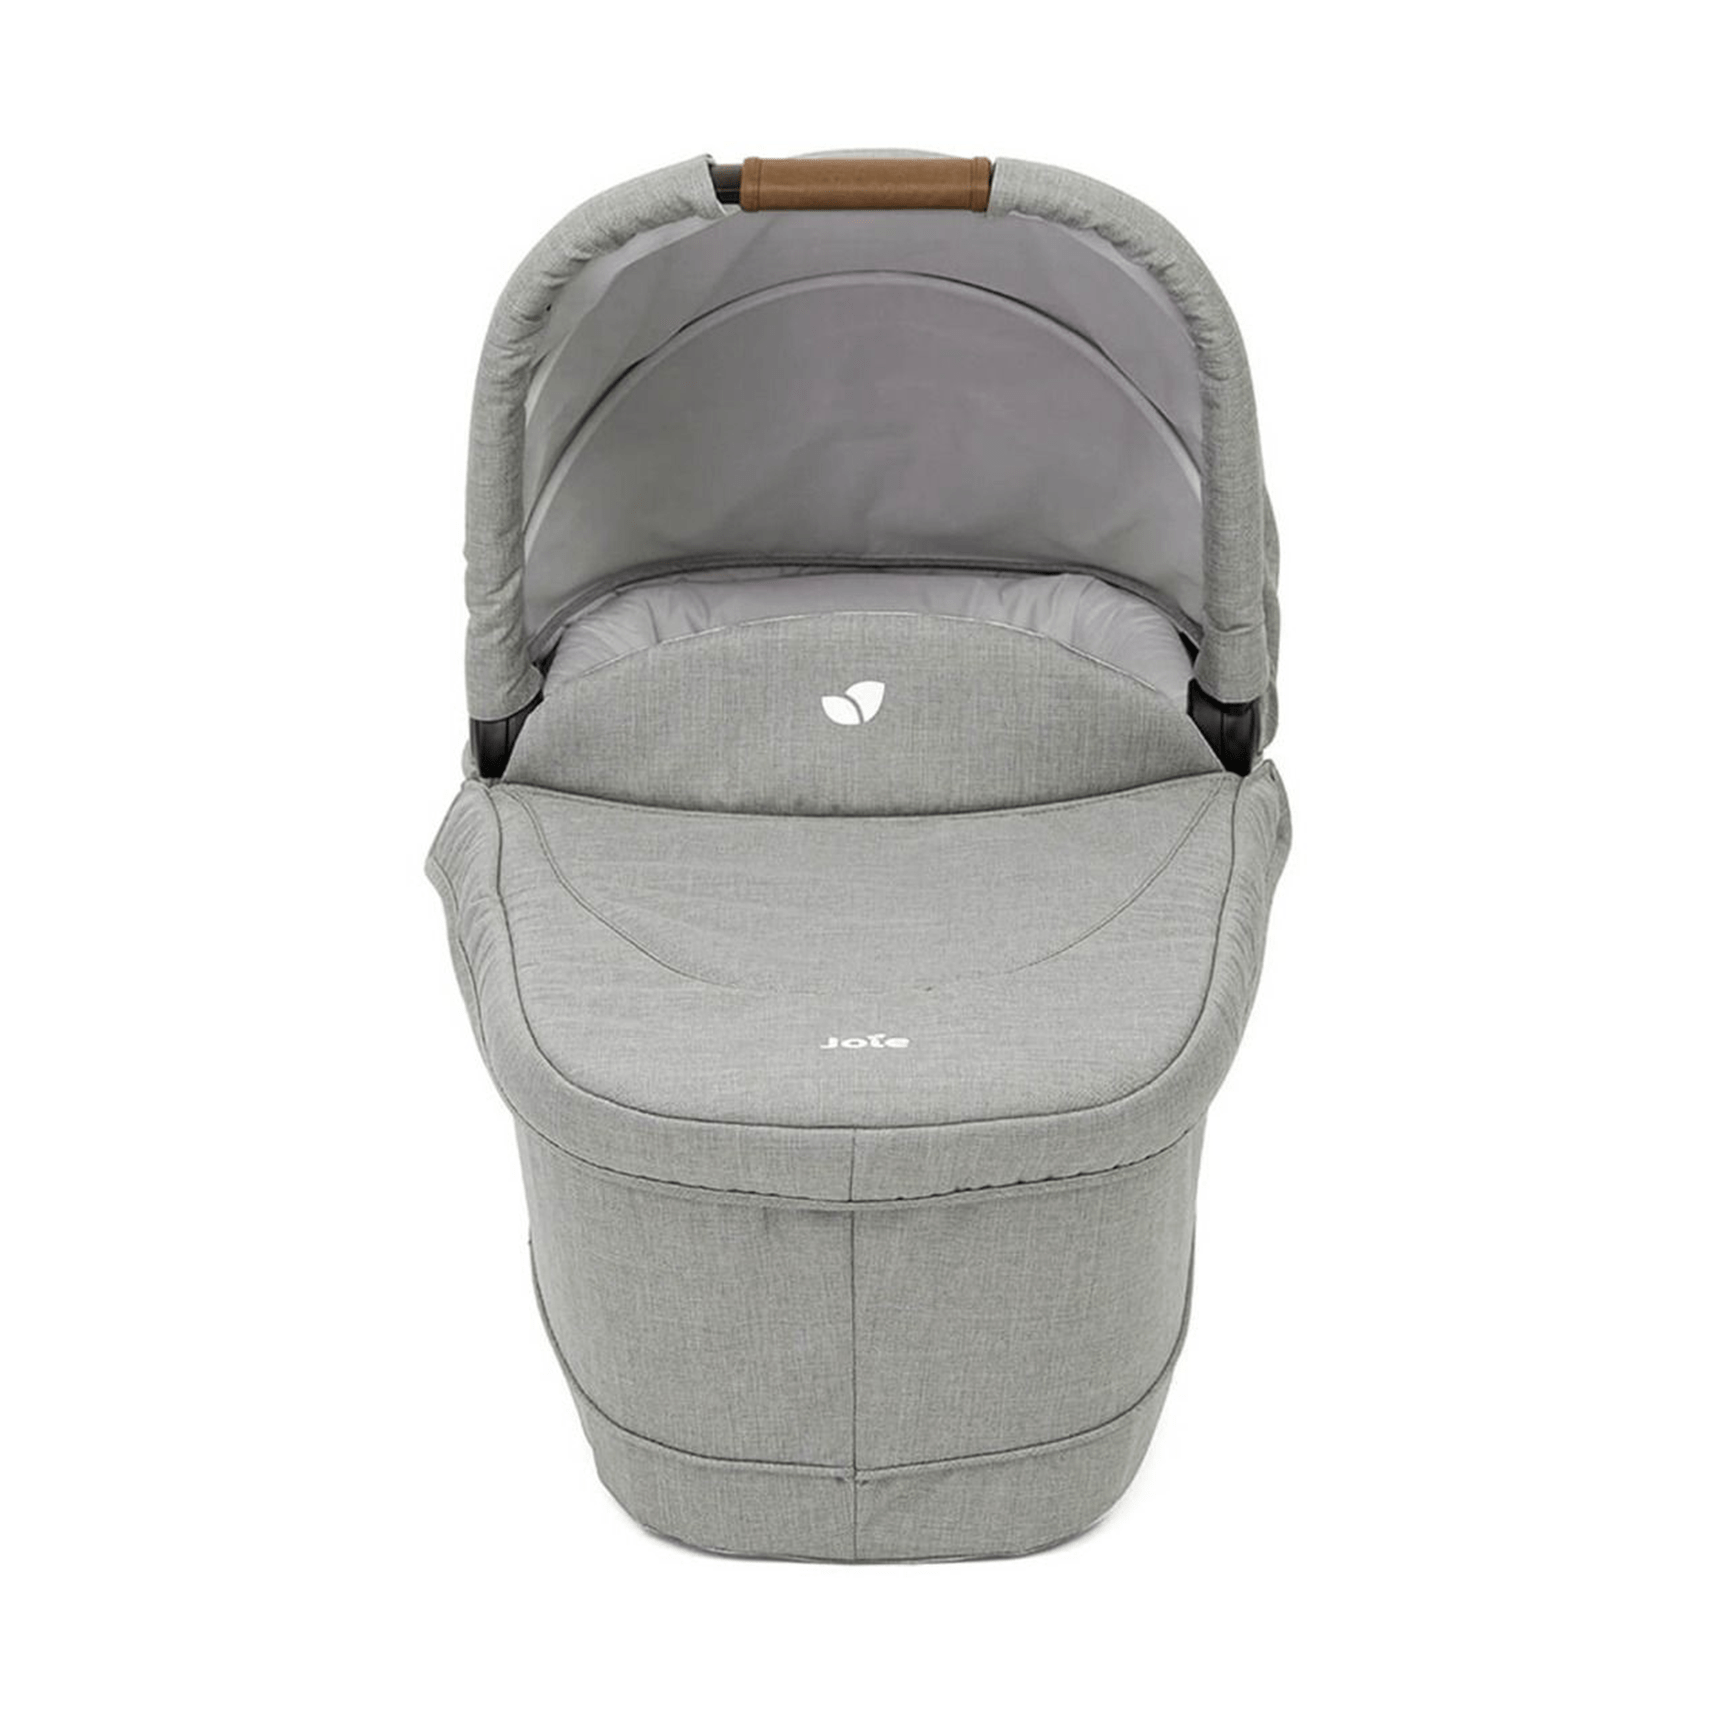 Joie Ramble XL Carrycot in Pebble Chassis & Carrycots A1219PDPEB000 5056080615240